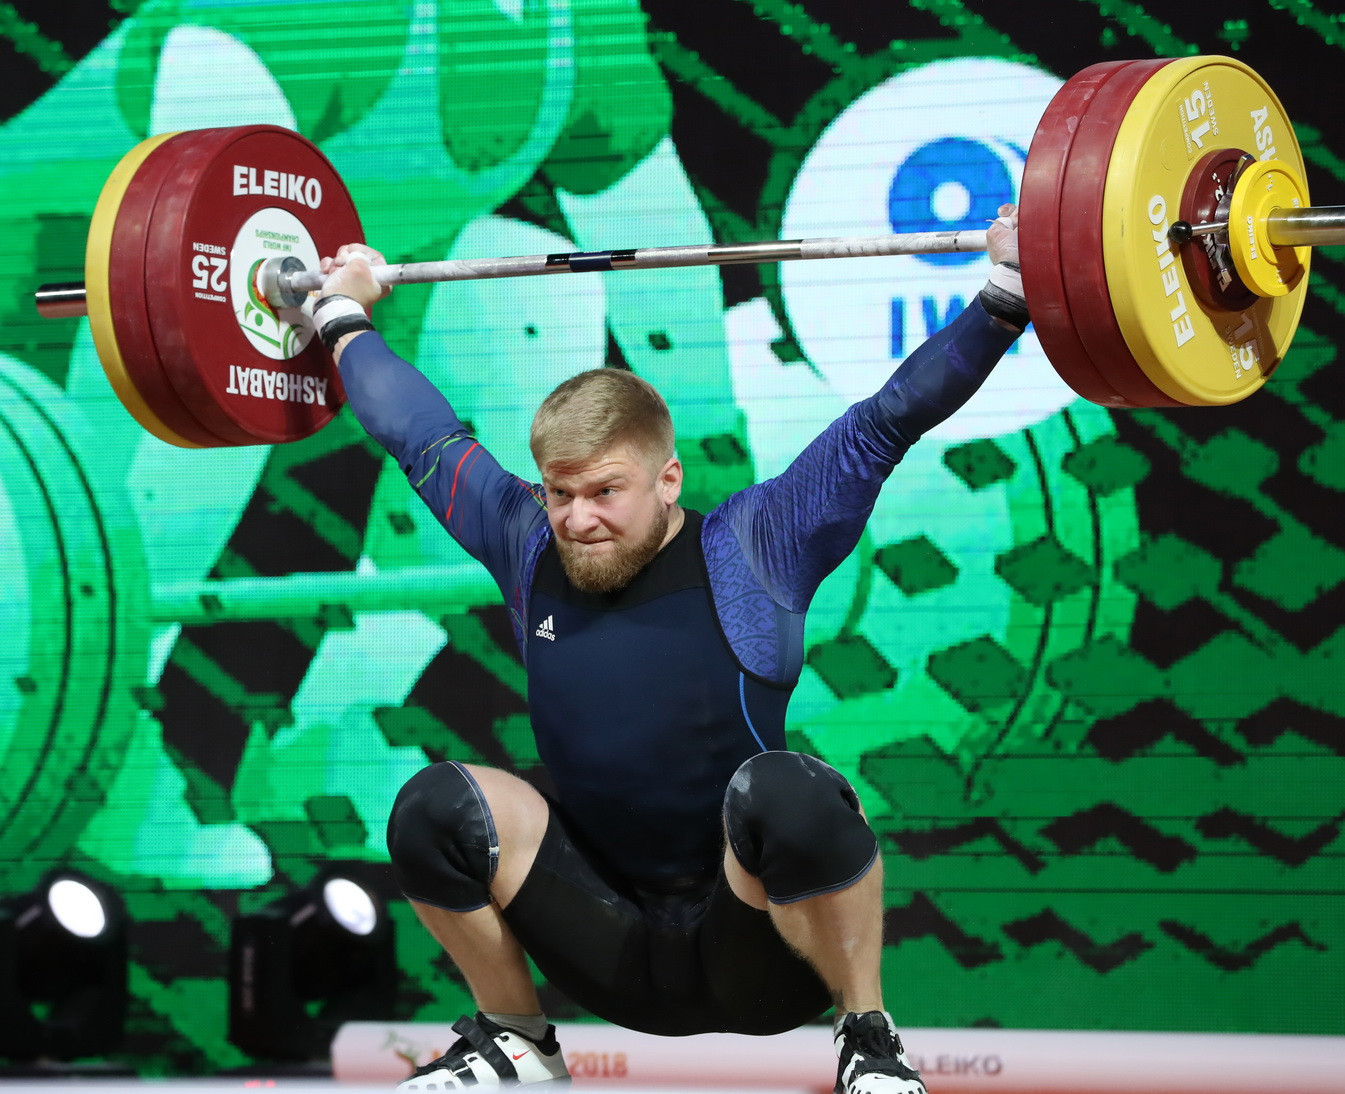 The overall runner-up was Belarus’ Pavel Khadasevich with 371kg ©IWF